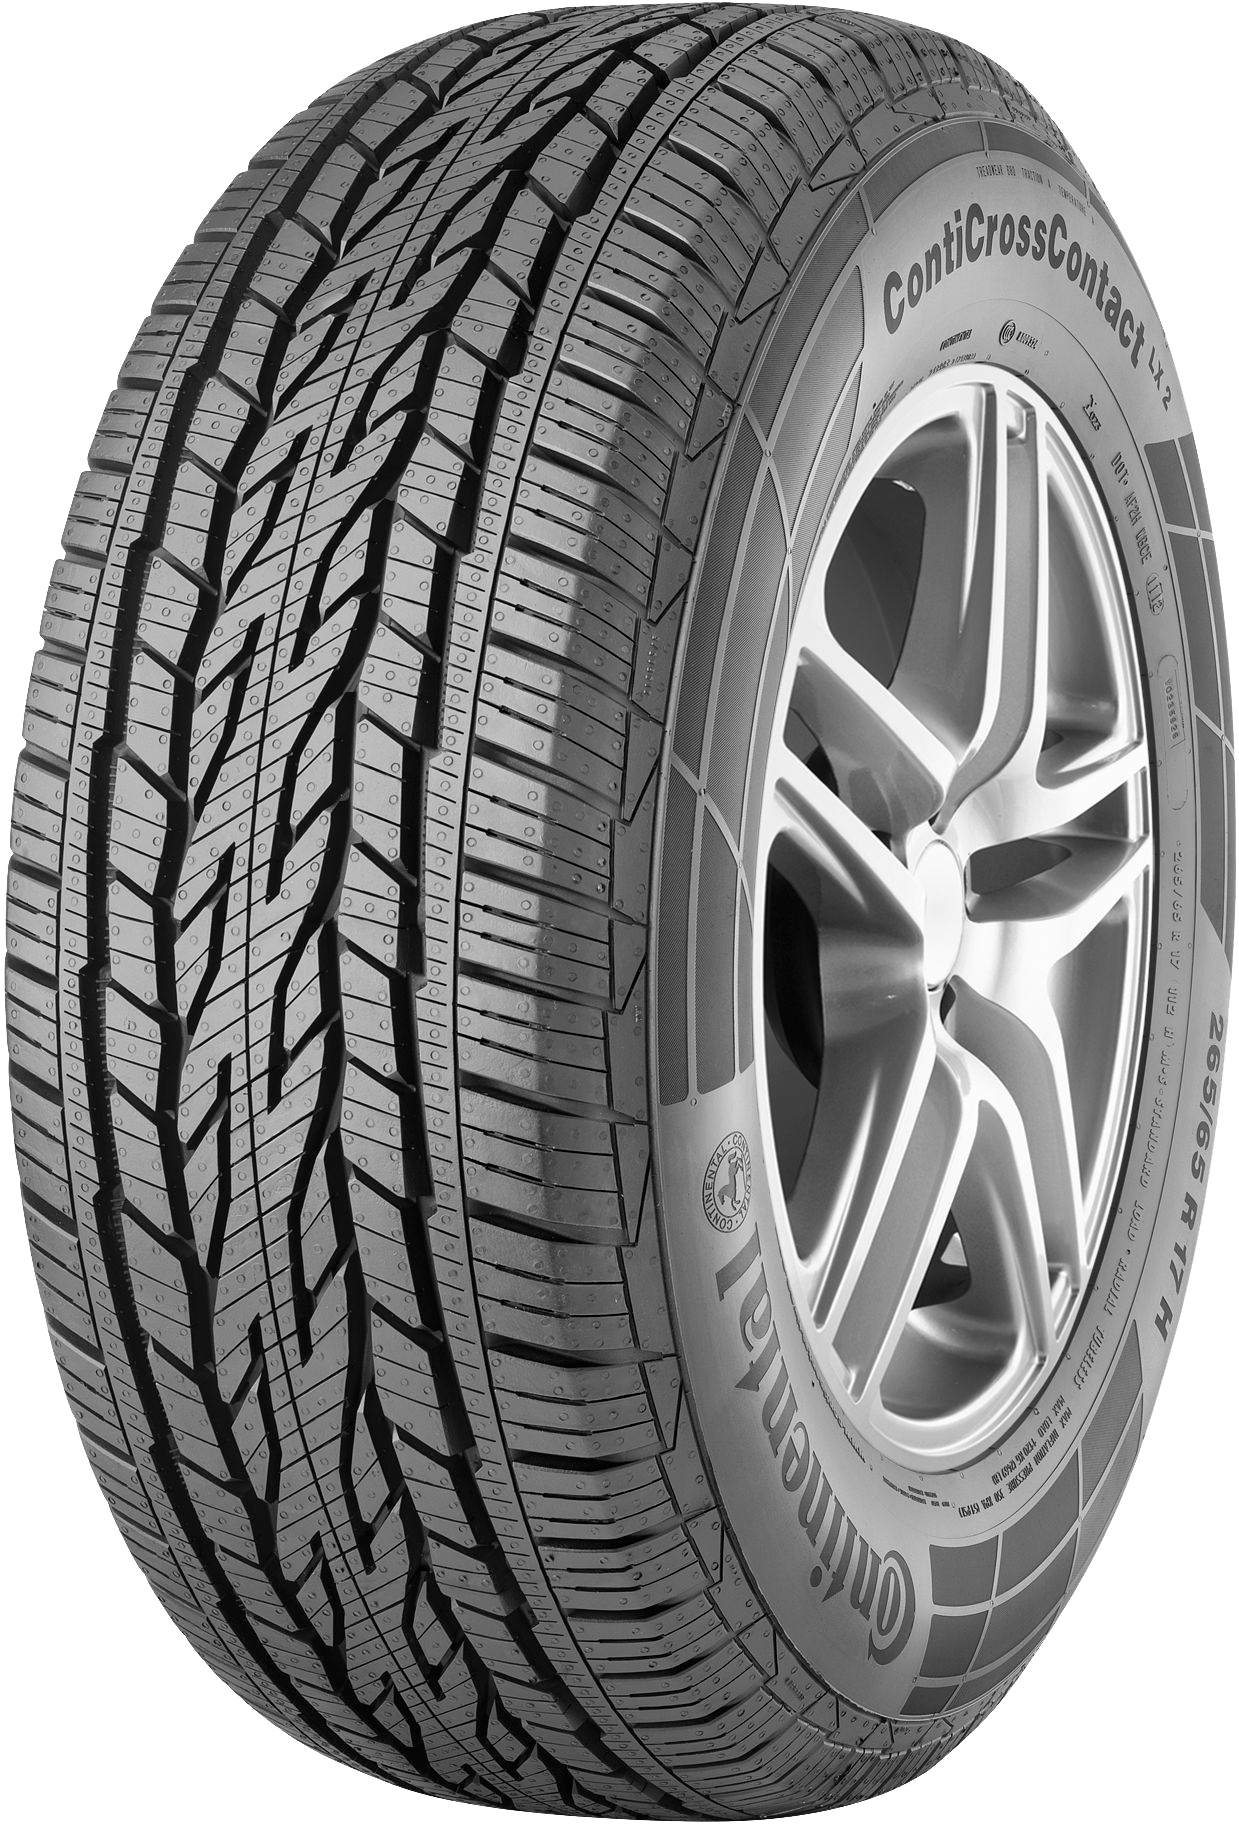 CONTINENTAL ContiCrossContact LX2 225/70 R15 100T